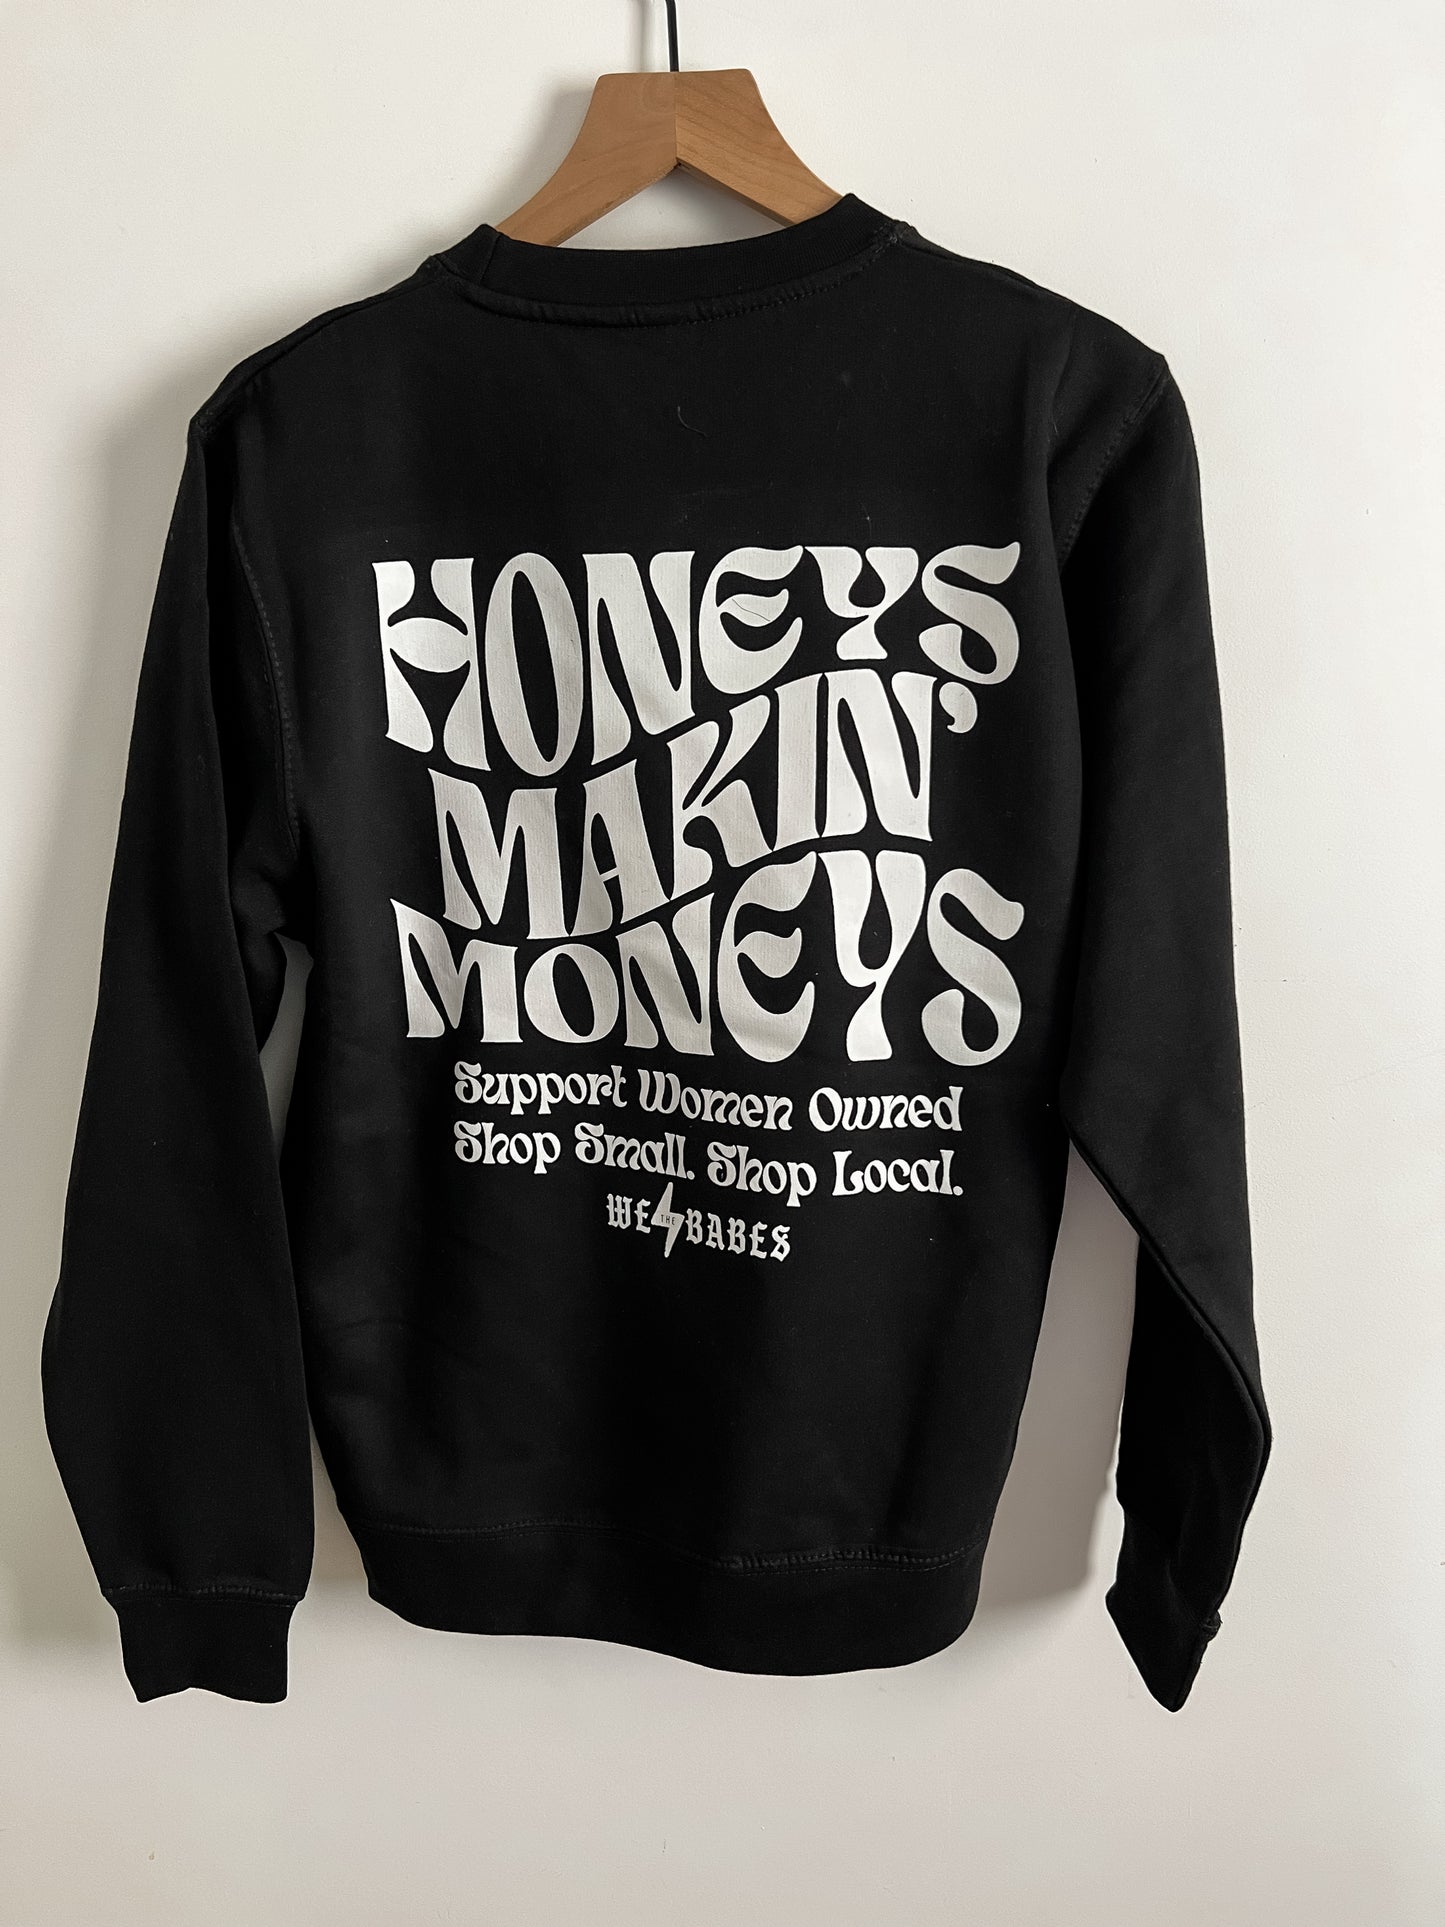 Support Women Owned Graphic Sweatshirt